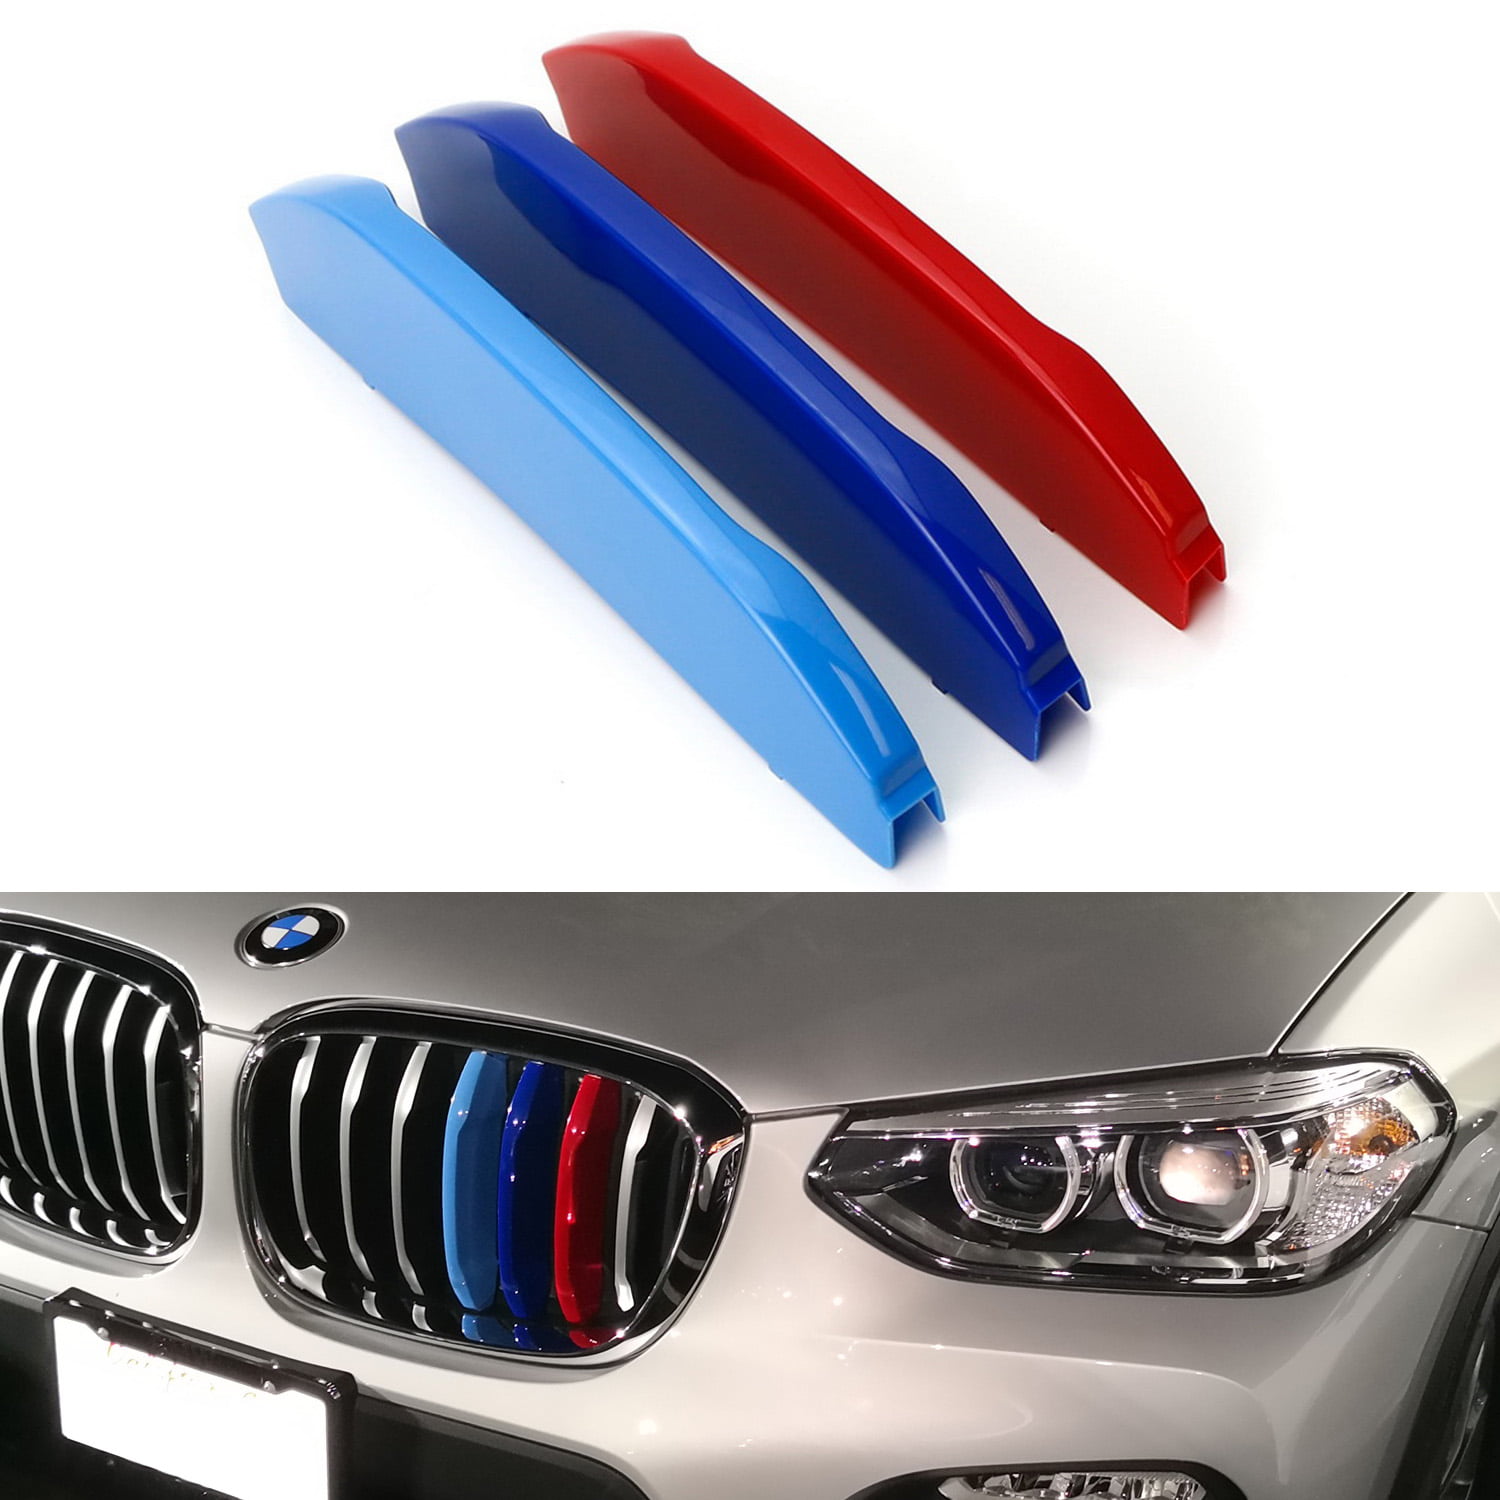 Longzhimei Fit for X3 G01 X4 G02 2018 M-Colored Front Grille Insert Trim Strips Grill Cover 3Pcs 7 Grilles